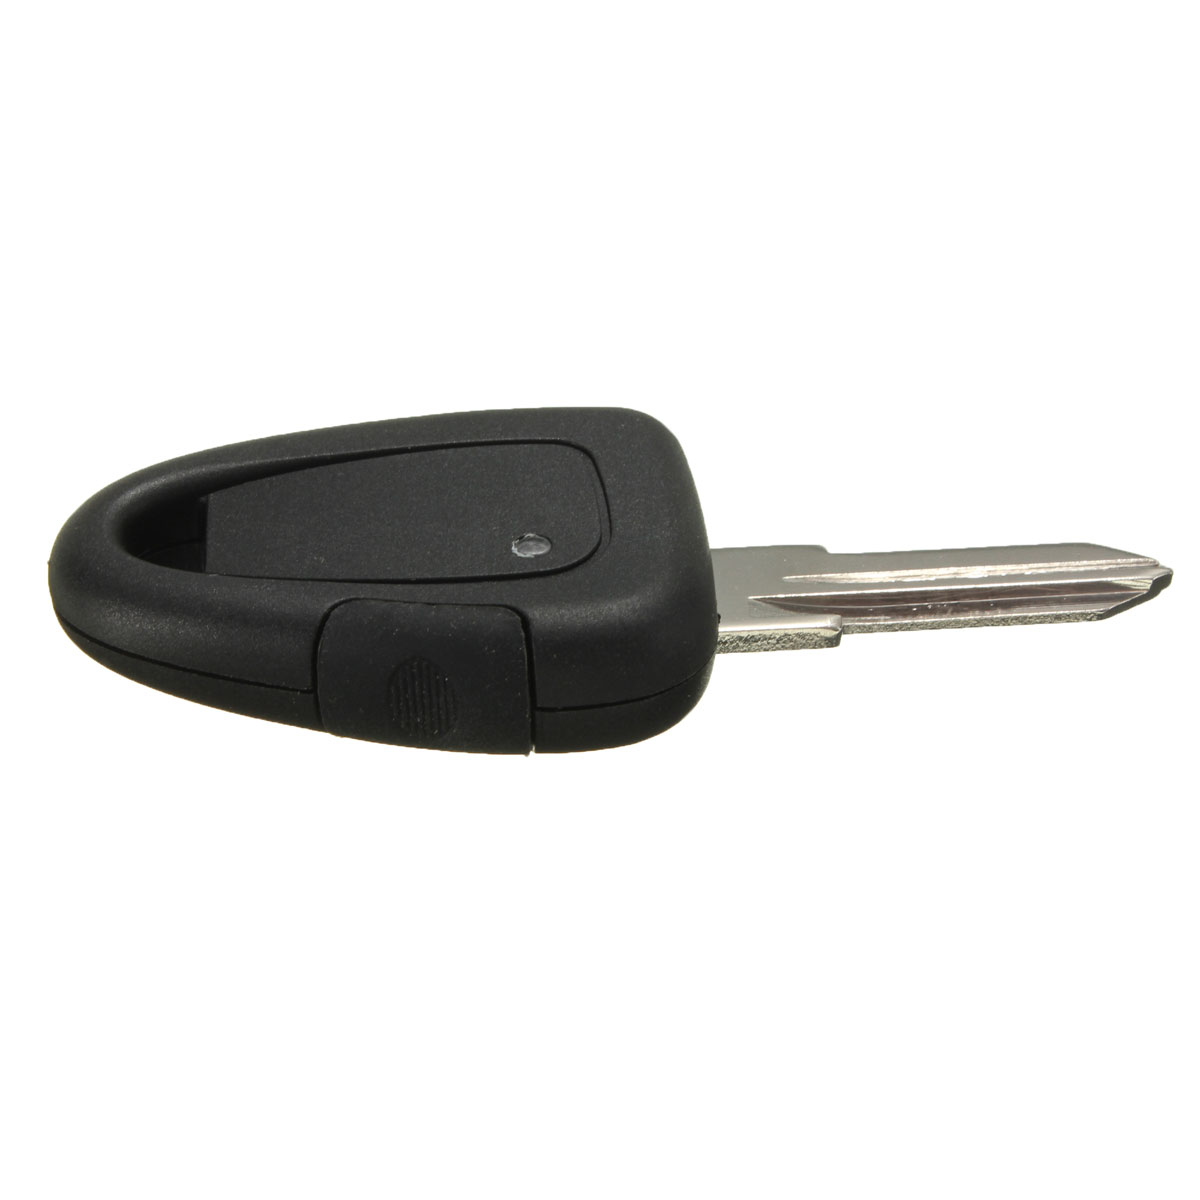 Replacement Transponder Remote Key Shell Case with Uncut Blade for Fiat IVECO DUCATO